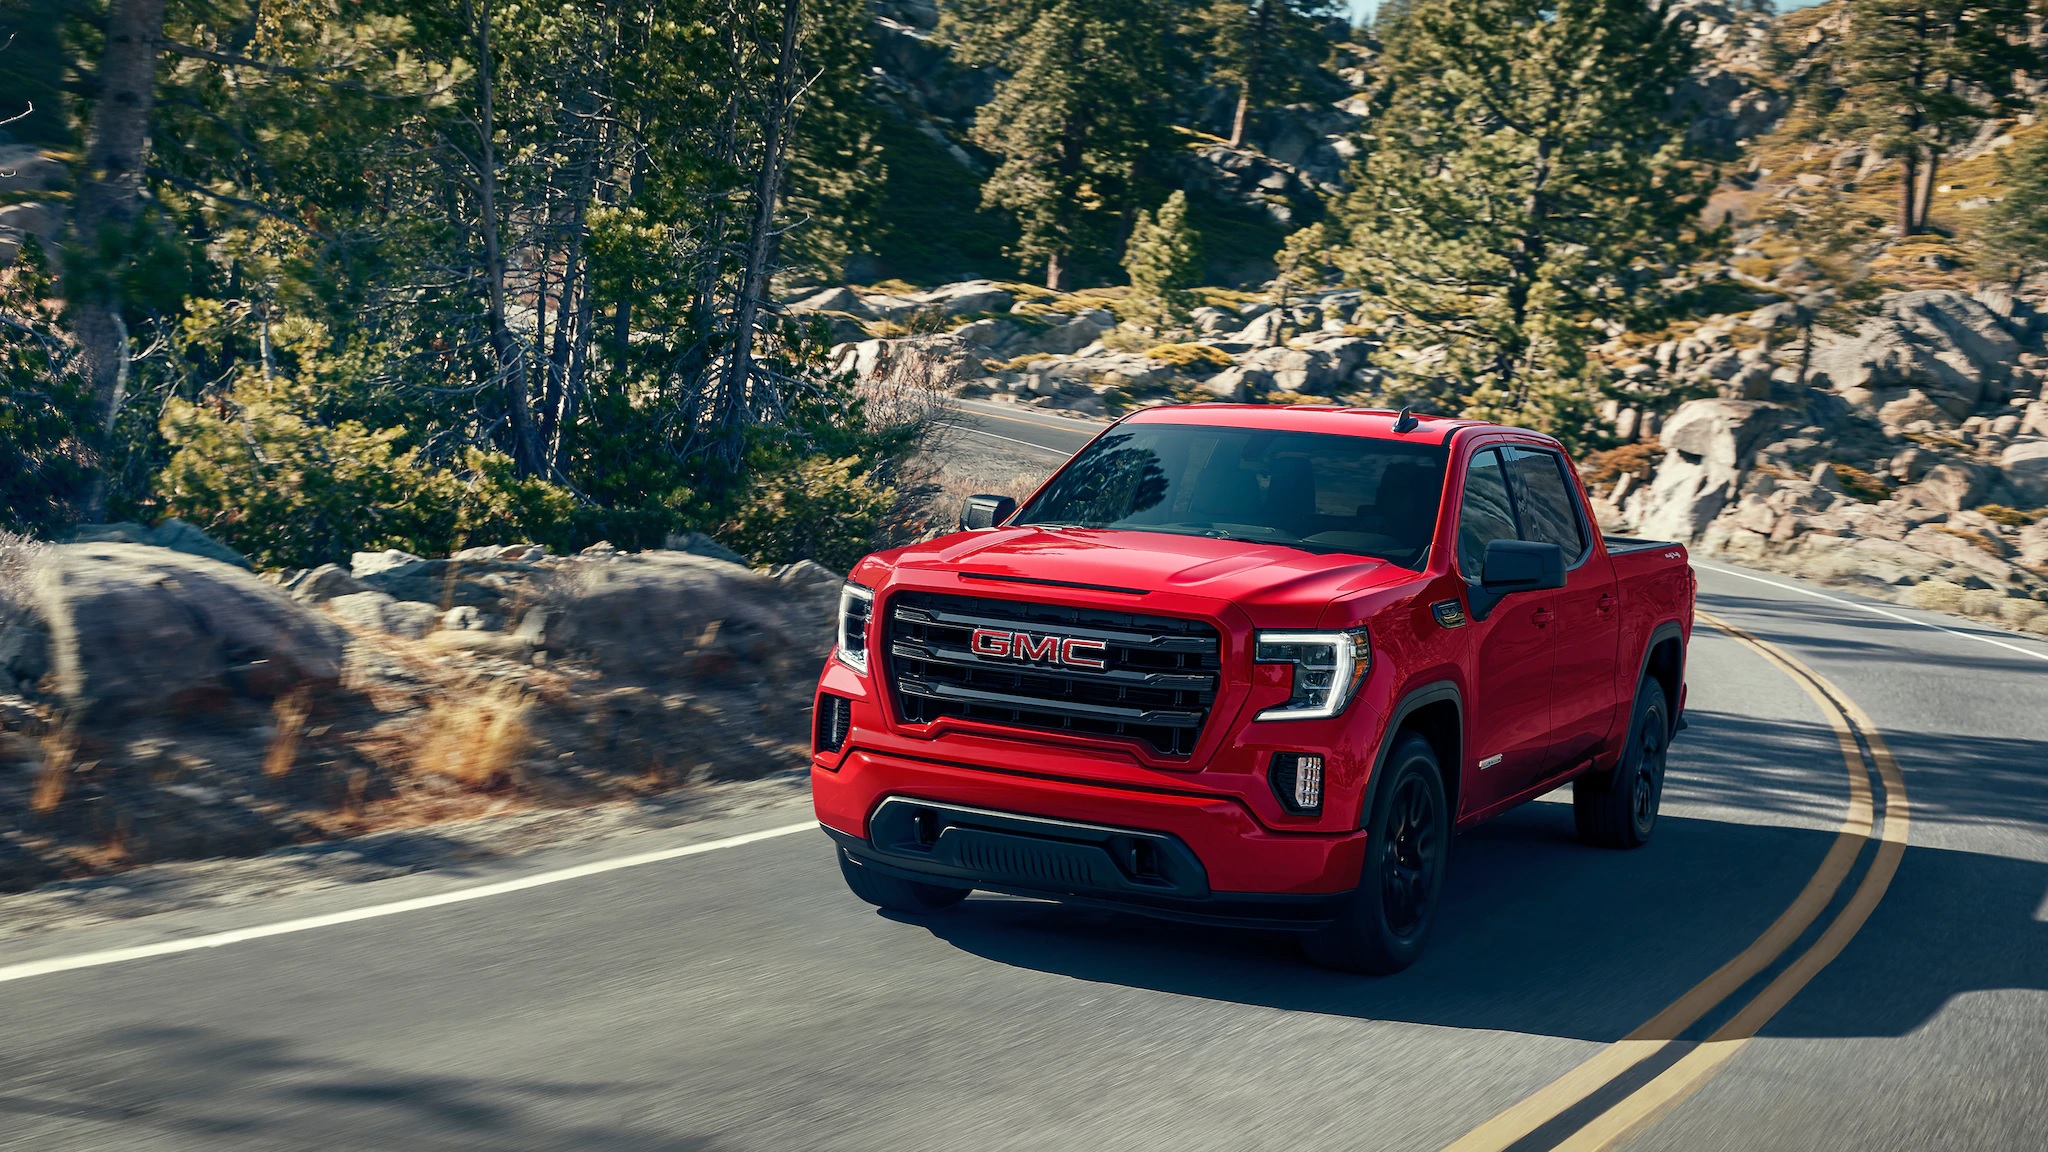 5 Common Questions About the GMC Sierra